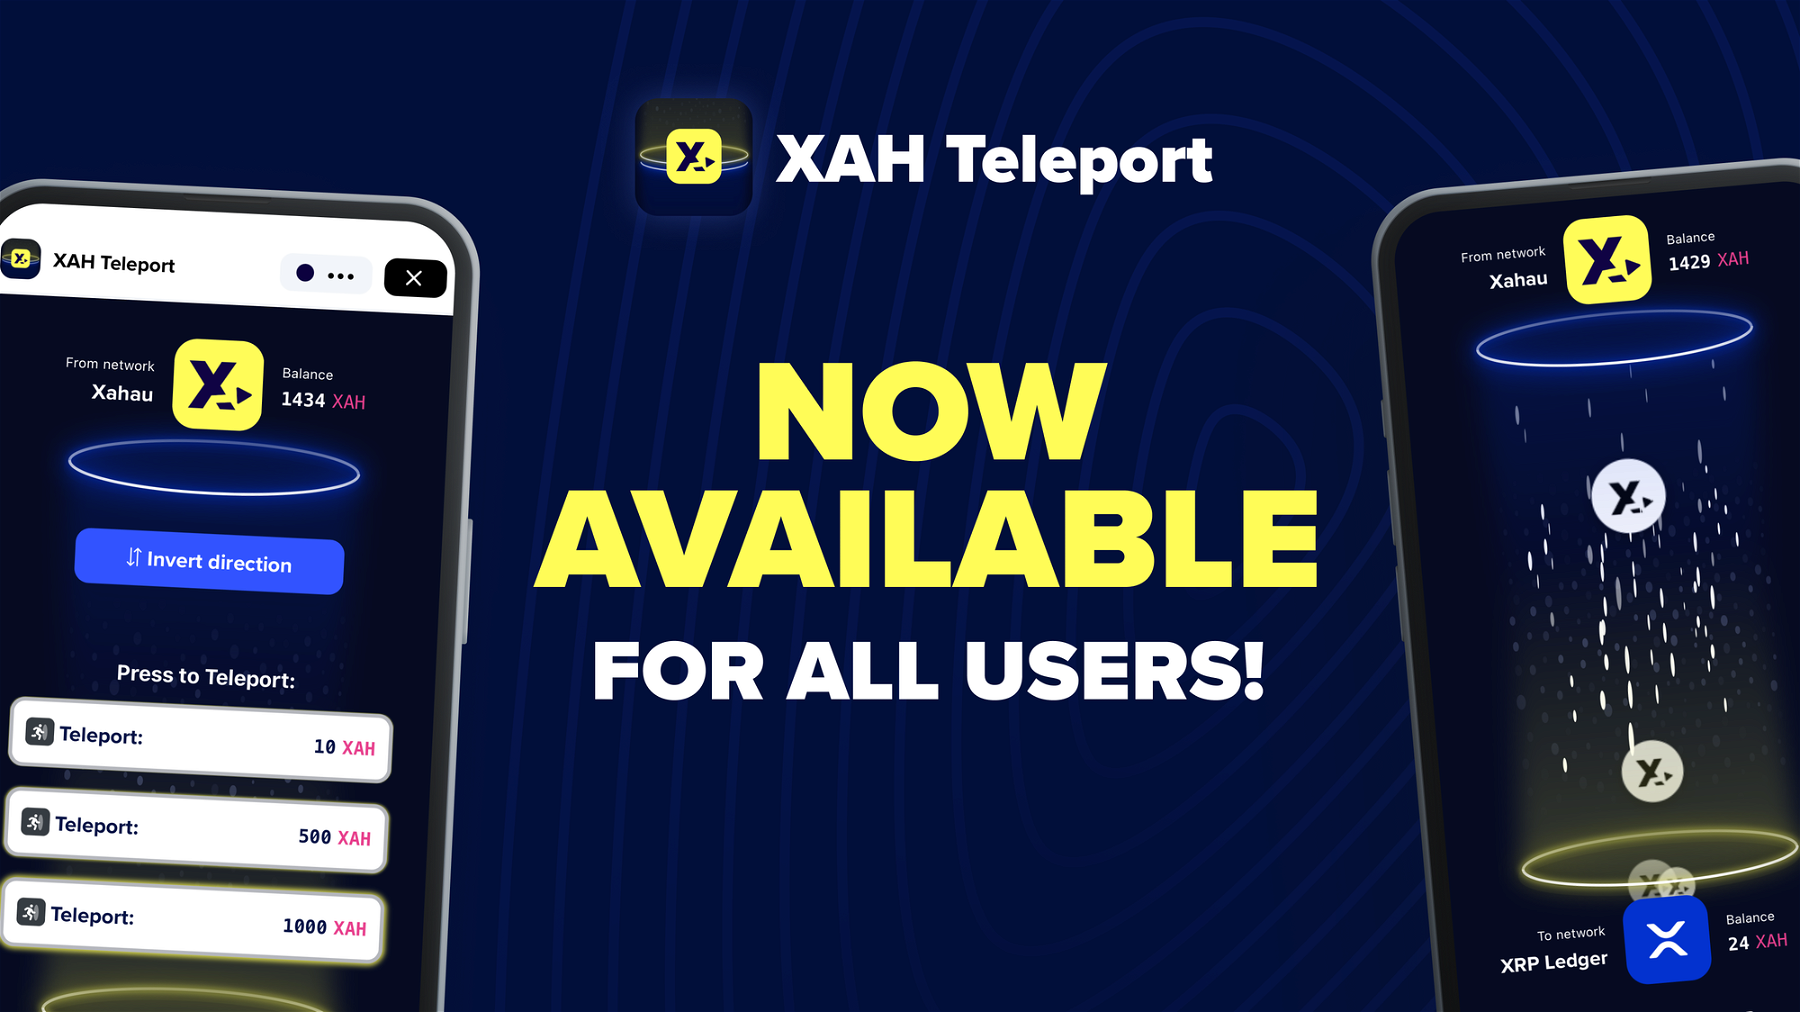 Introducing the XAH Teleport xApp: Cross-Network Transactions Made Easy